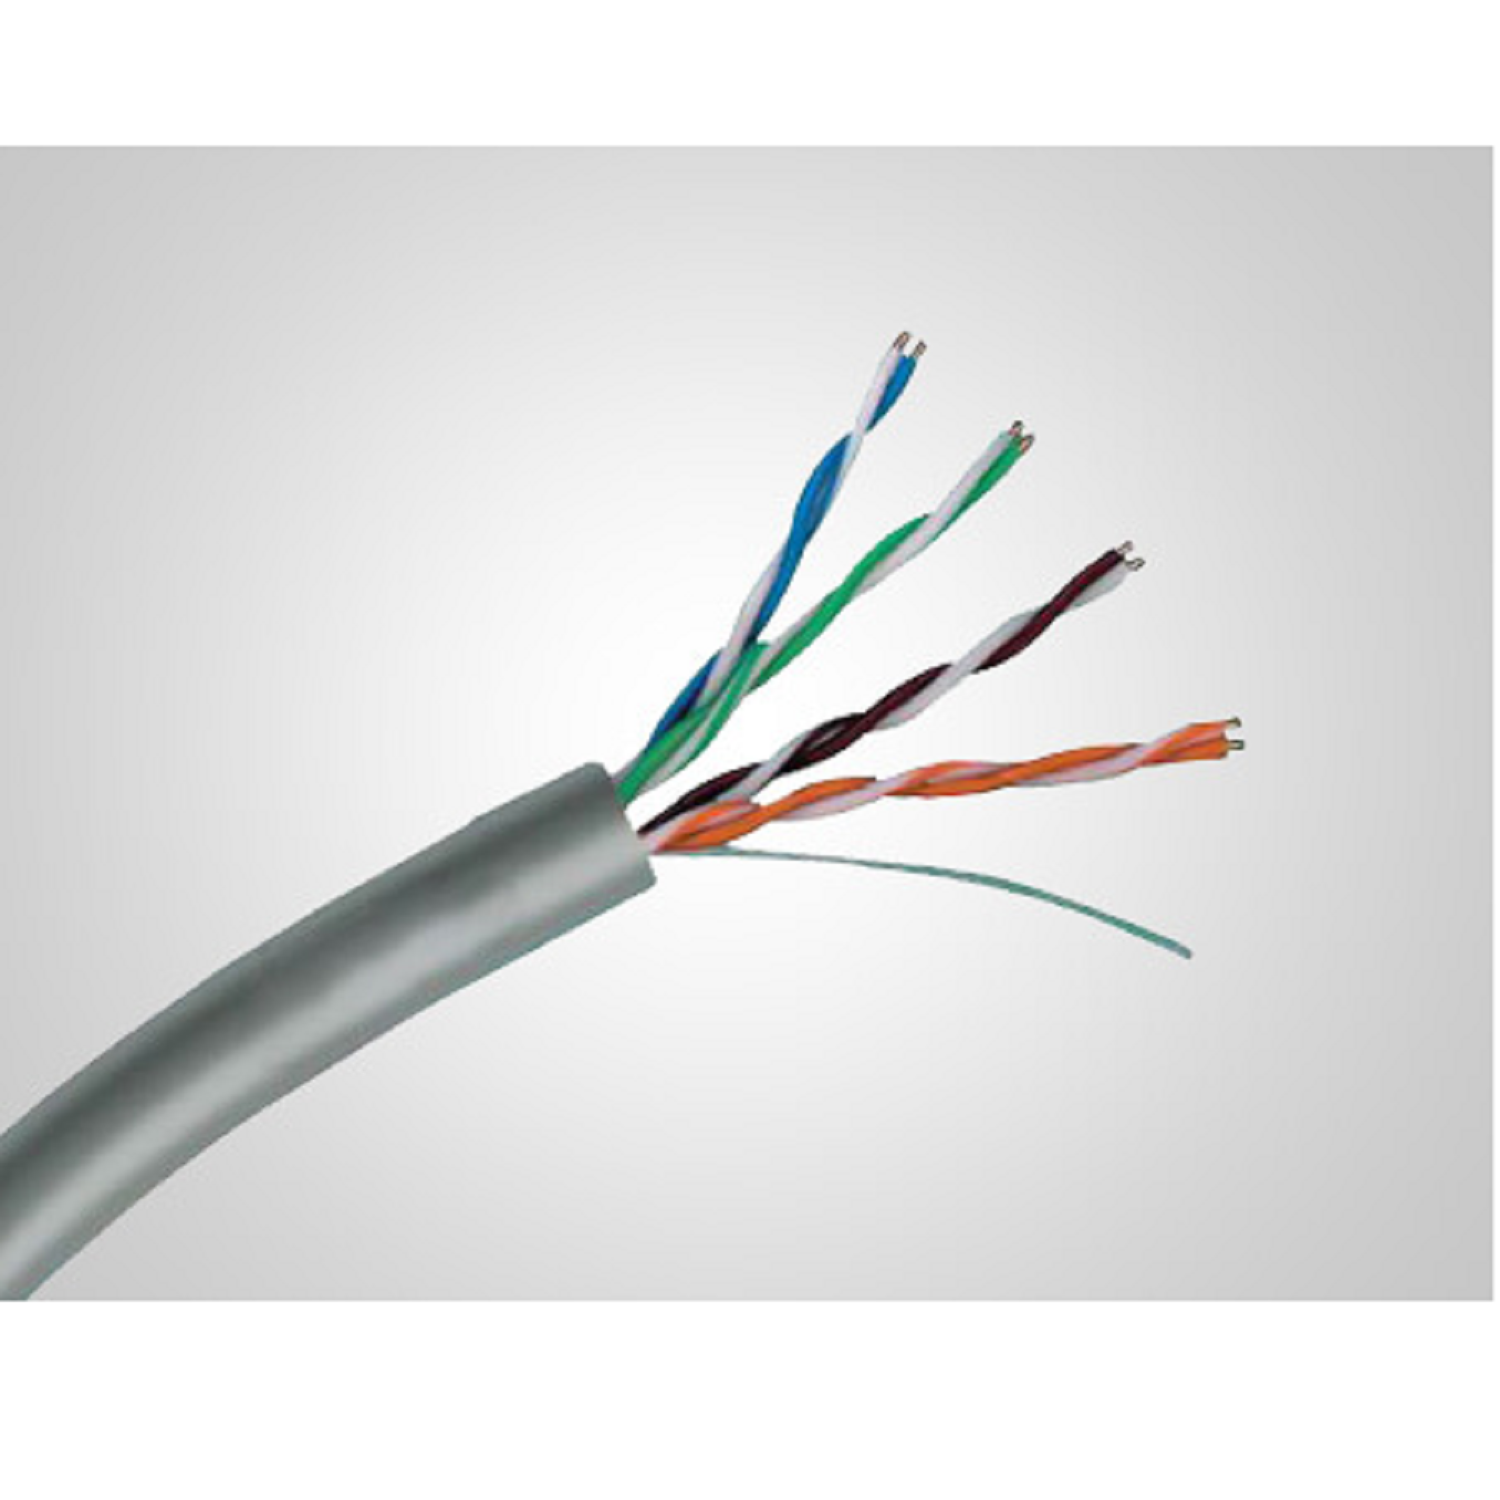 Teliphone Cable Polycab 0.4 (500 Meter)